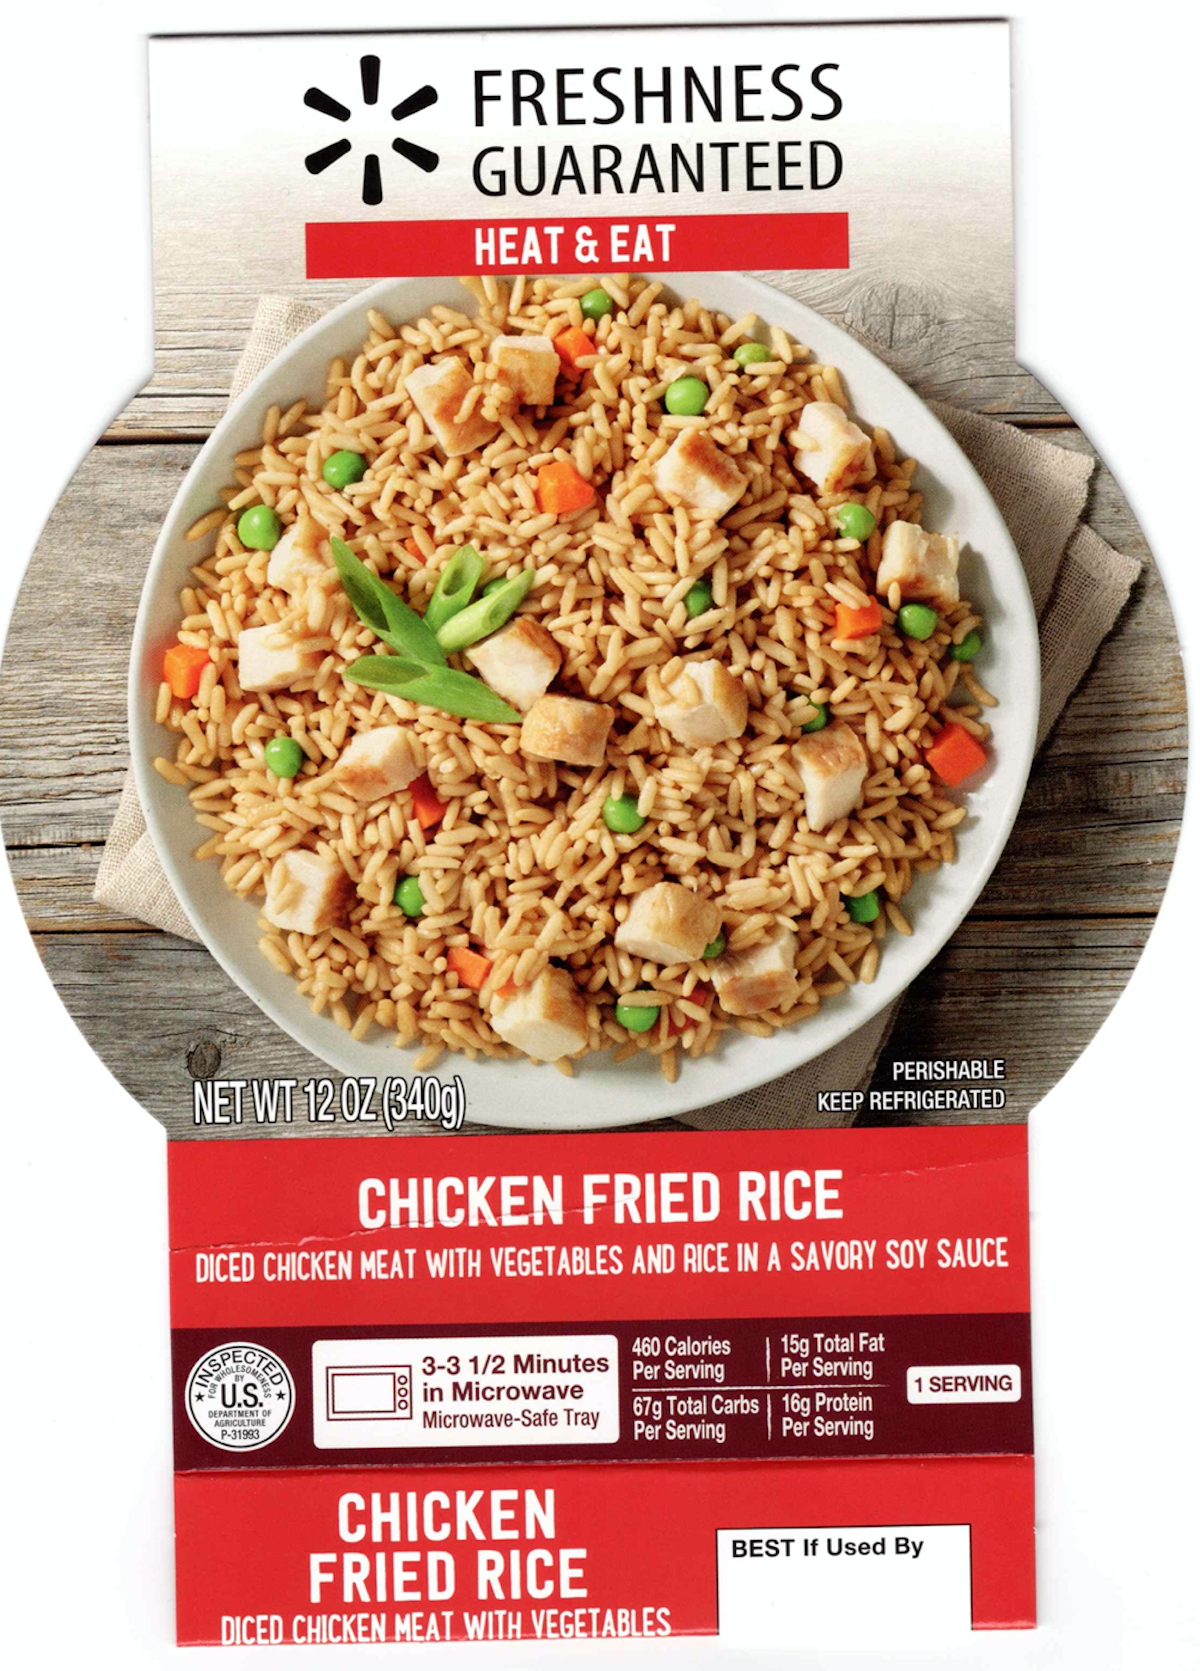 Texas company recalls chicken fried rice after tests show contamination with Listeria